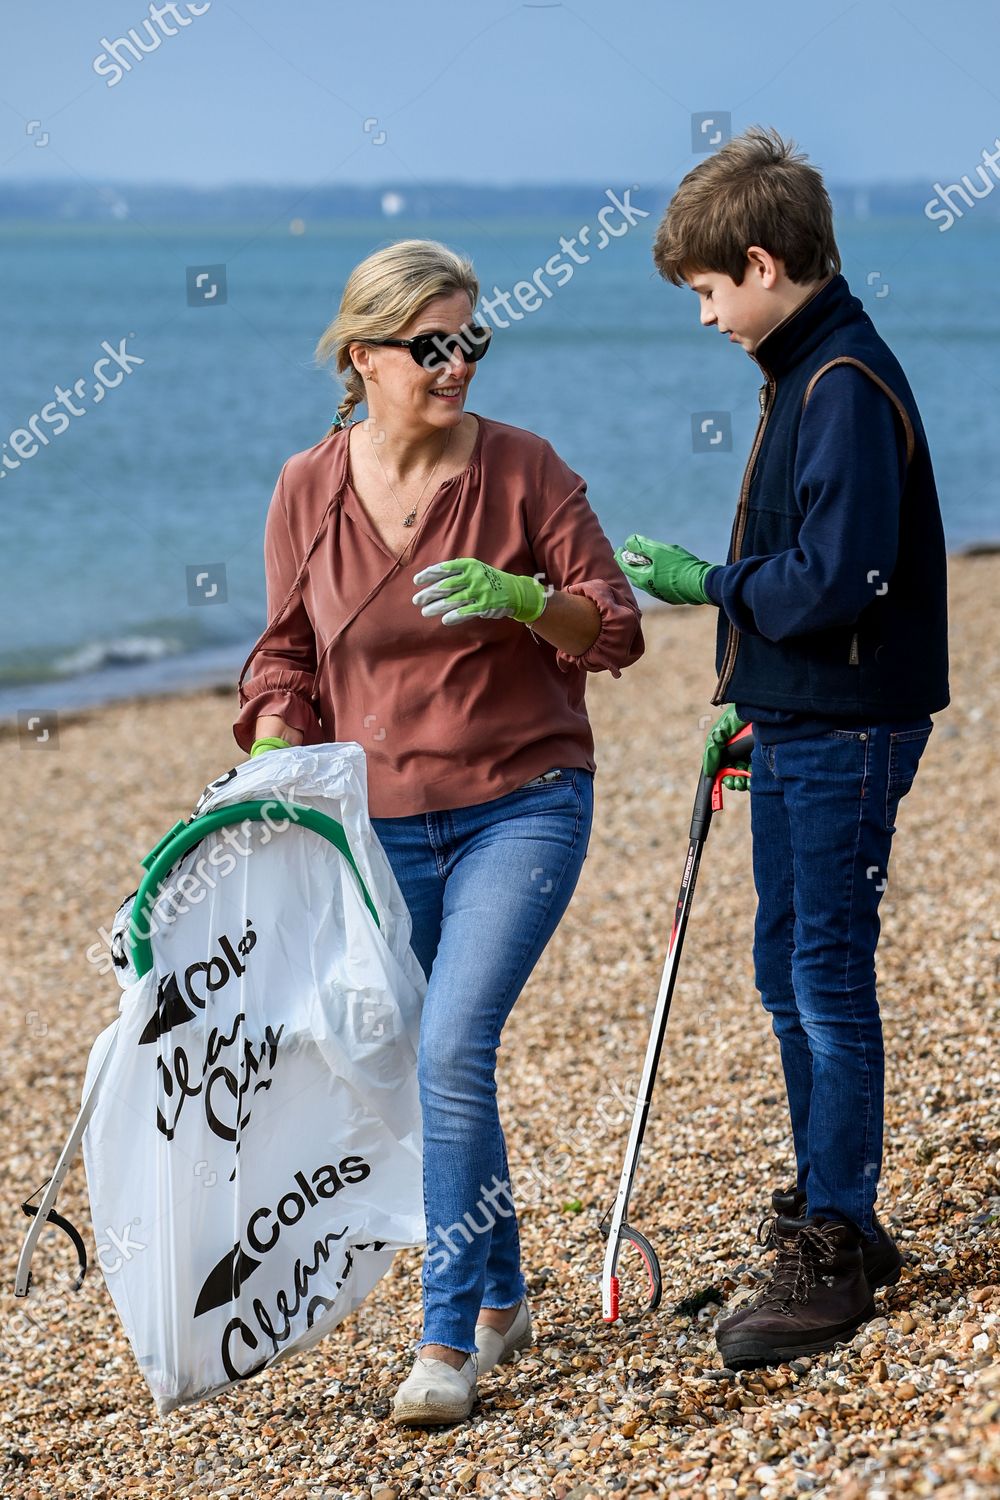 prince-edward-and-sophie-countess-of-wessex-great-british-beach-clean-southsea-beach-portsmouth-uk-shutterstock-editorial-10782998bb.jpg